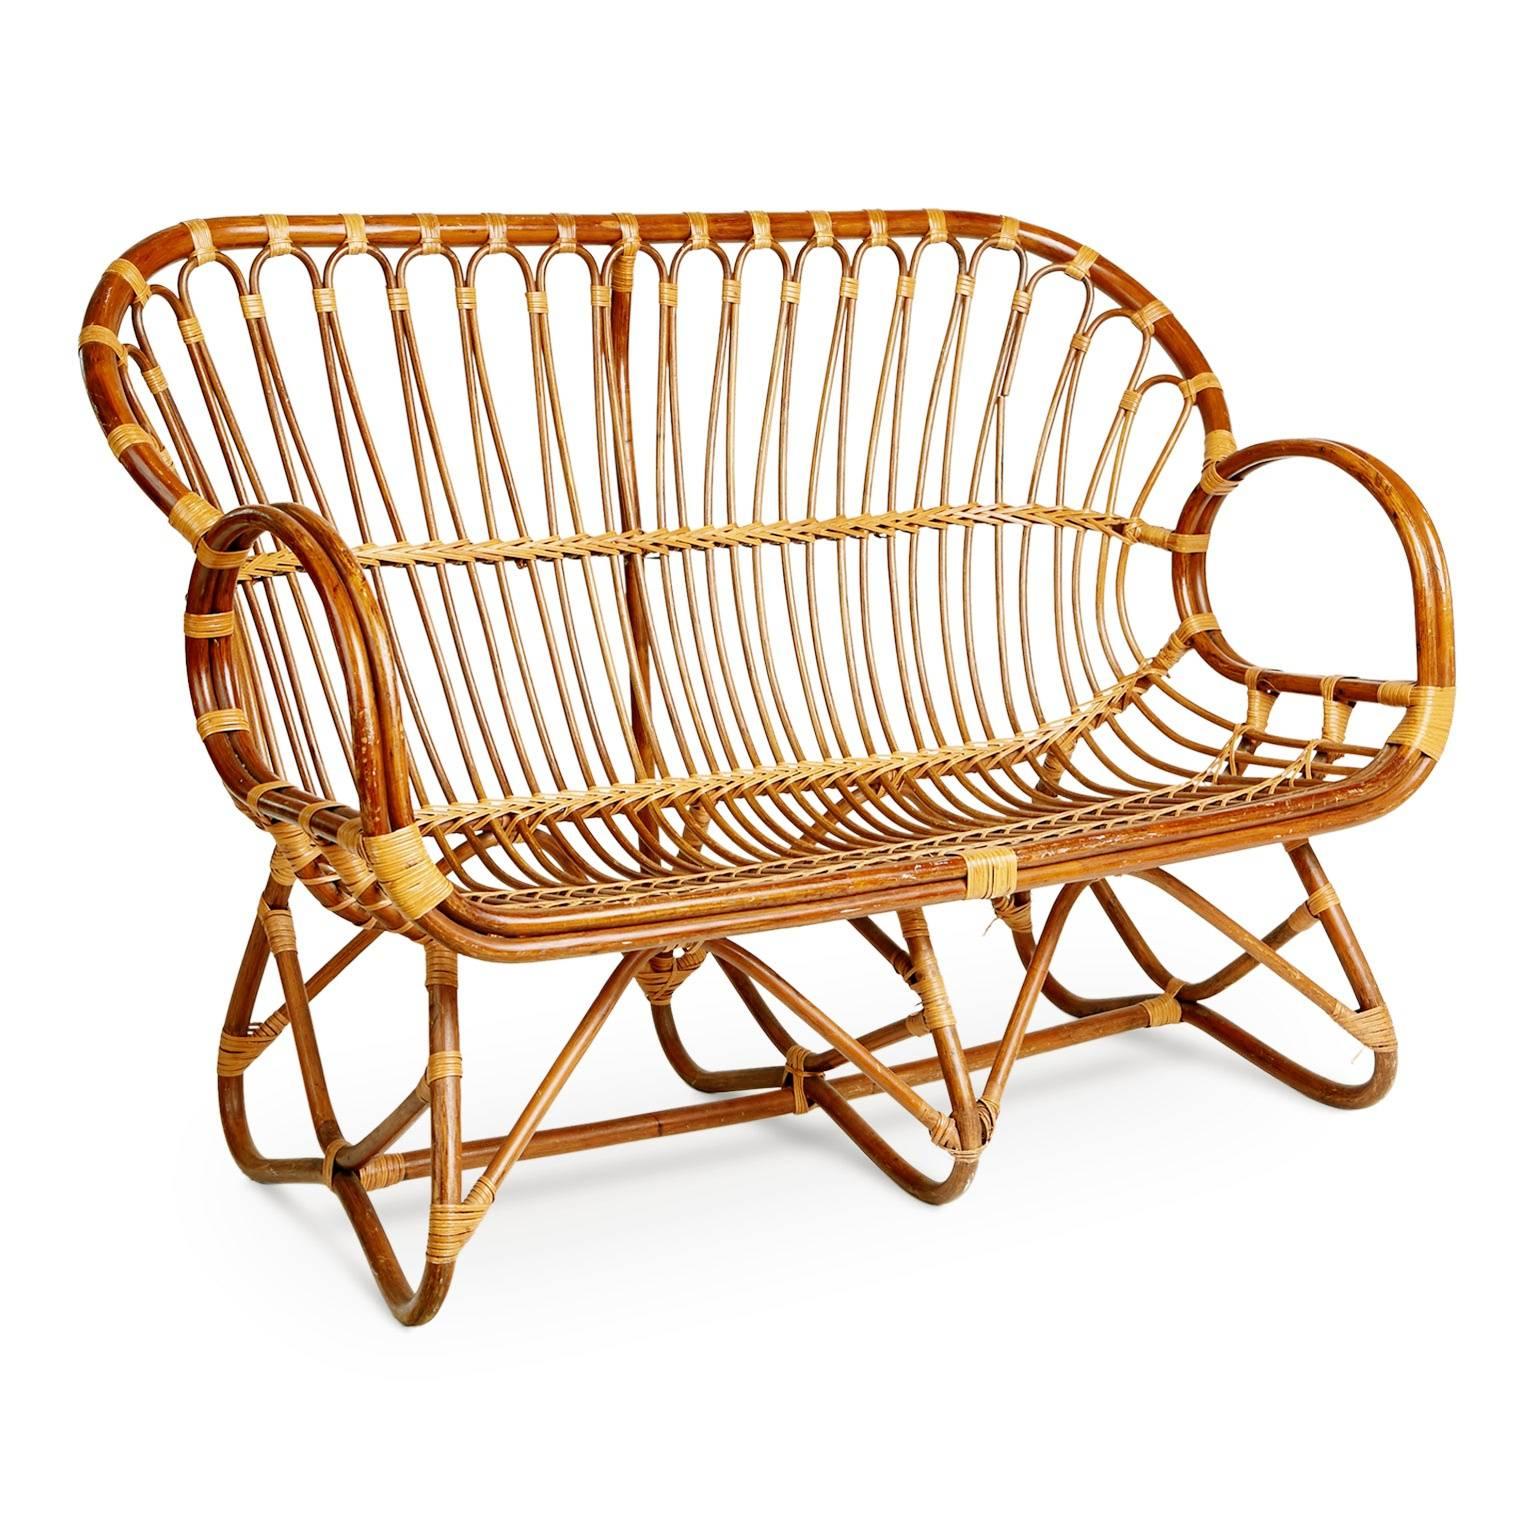 Possessing an amazing silhouette, this elegantly executed settee in the style of Franco Albini was fabricated from bent bamboo and tied off with cane accents forming an arched seat and with scrolled arms and integral twisted base. The simplicity of